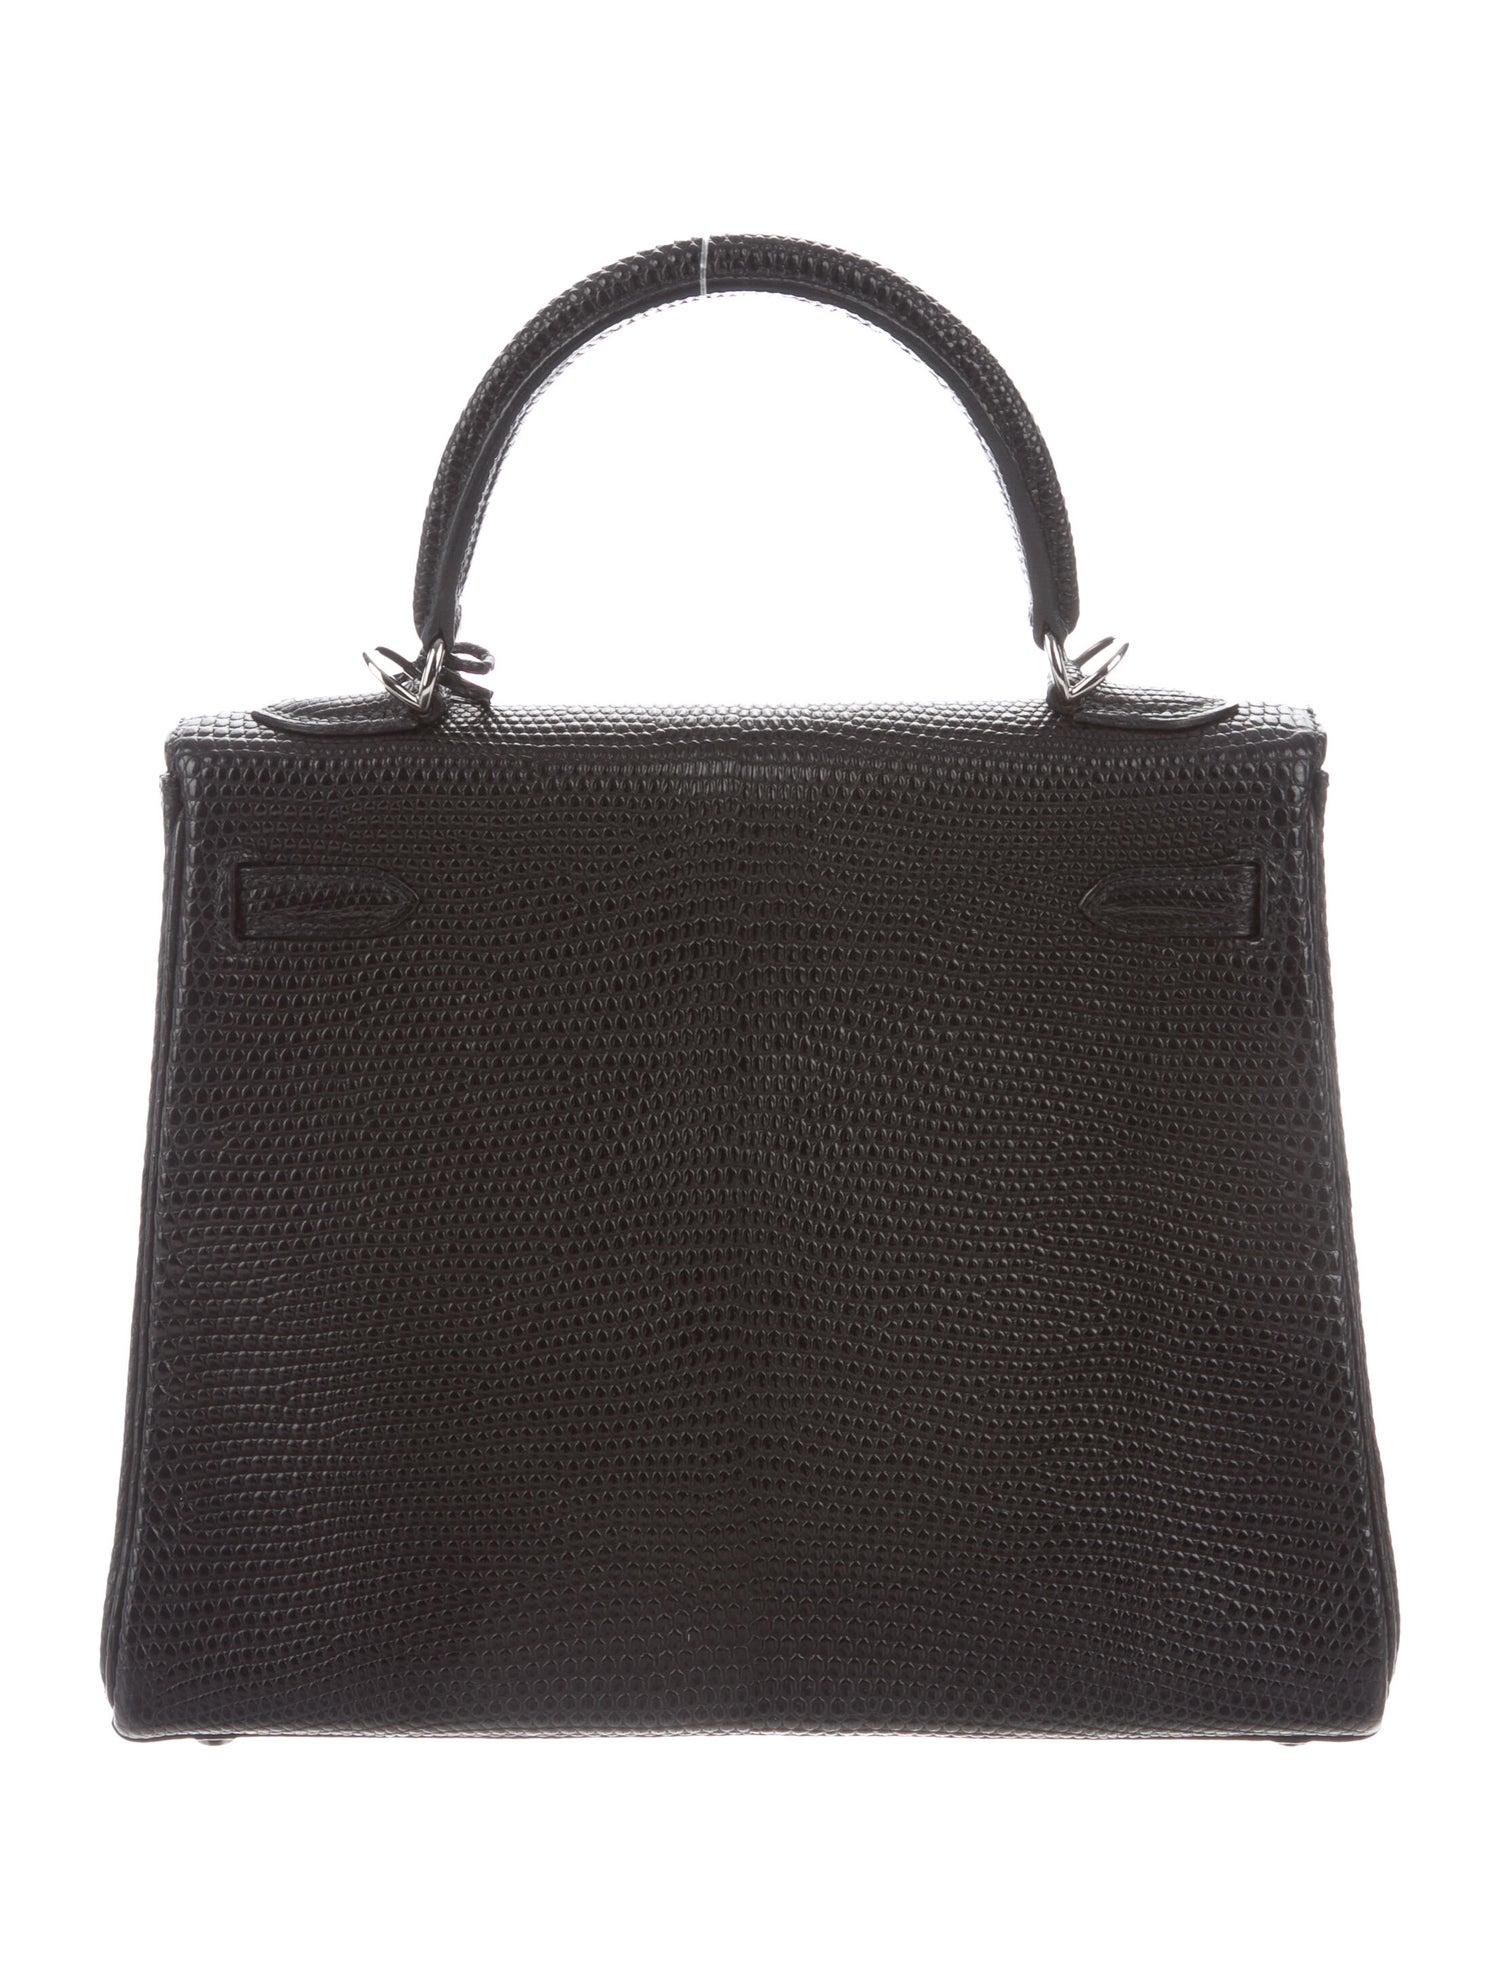 Hermes Kelly 25 Black Lizard Exotic Palladium Top Handle Tote Shoulder Bag W/Box In Good Condition In Chicago, IL